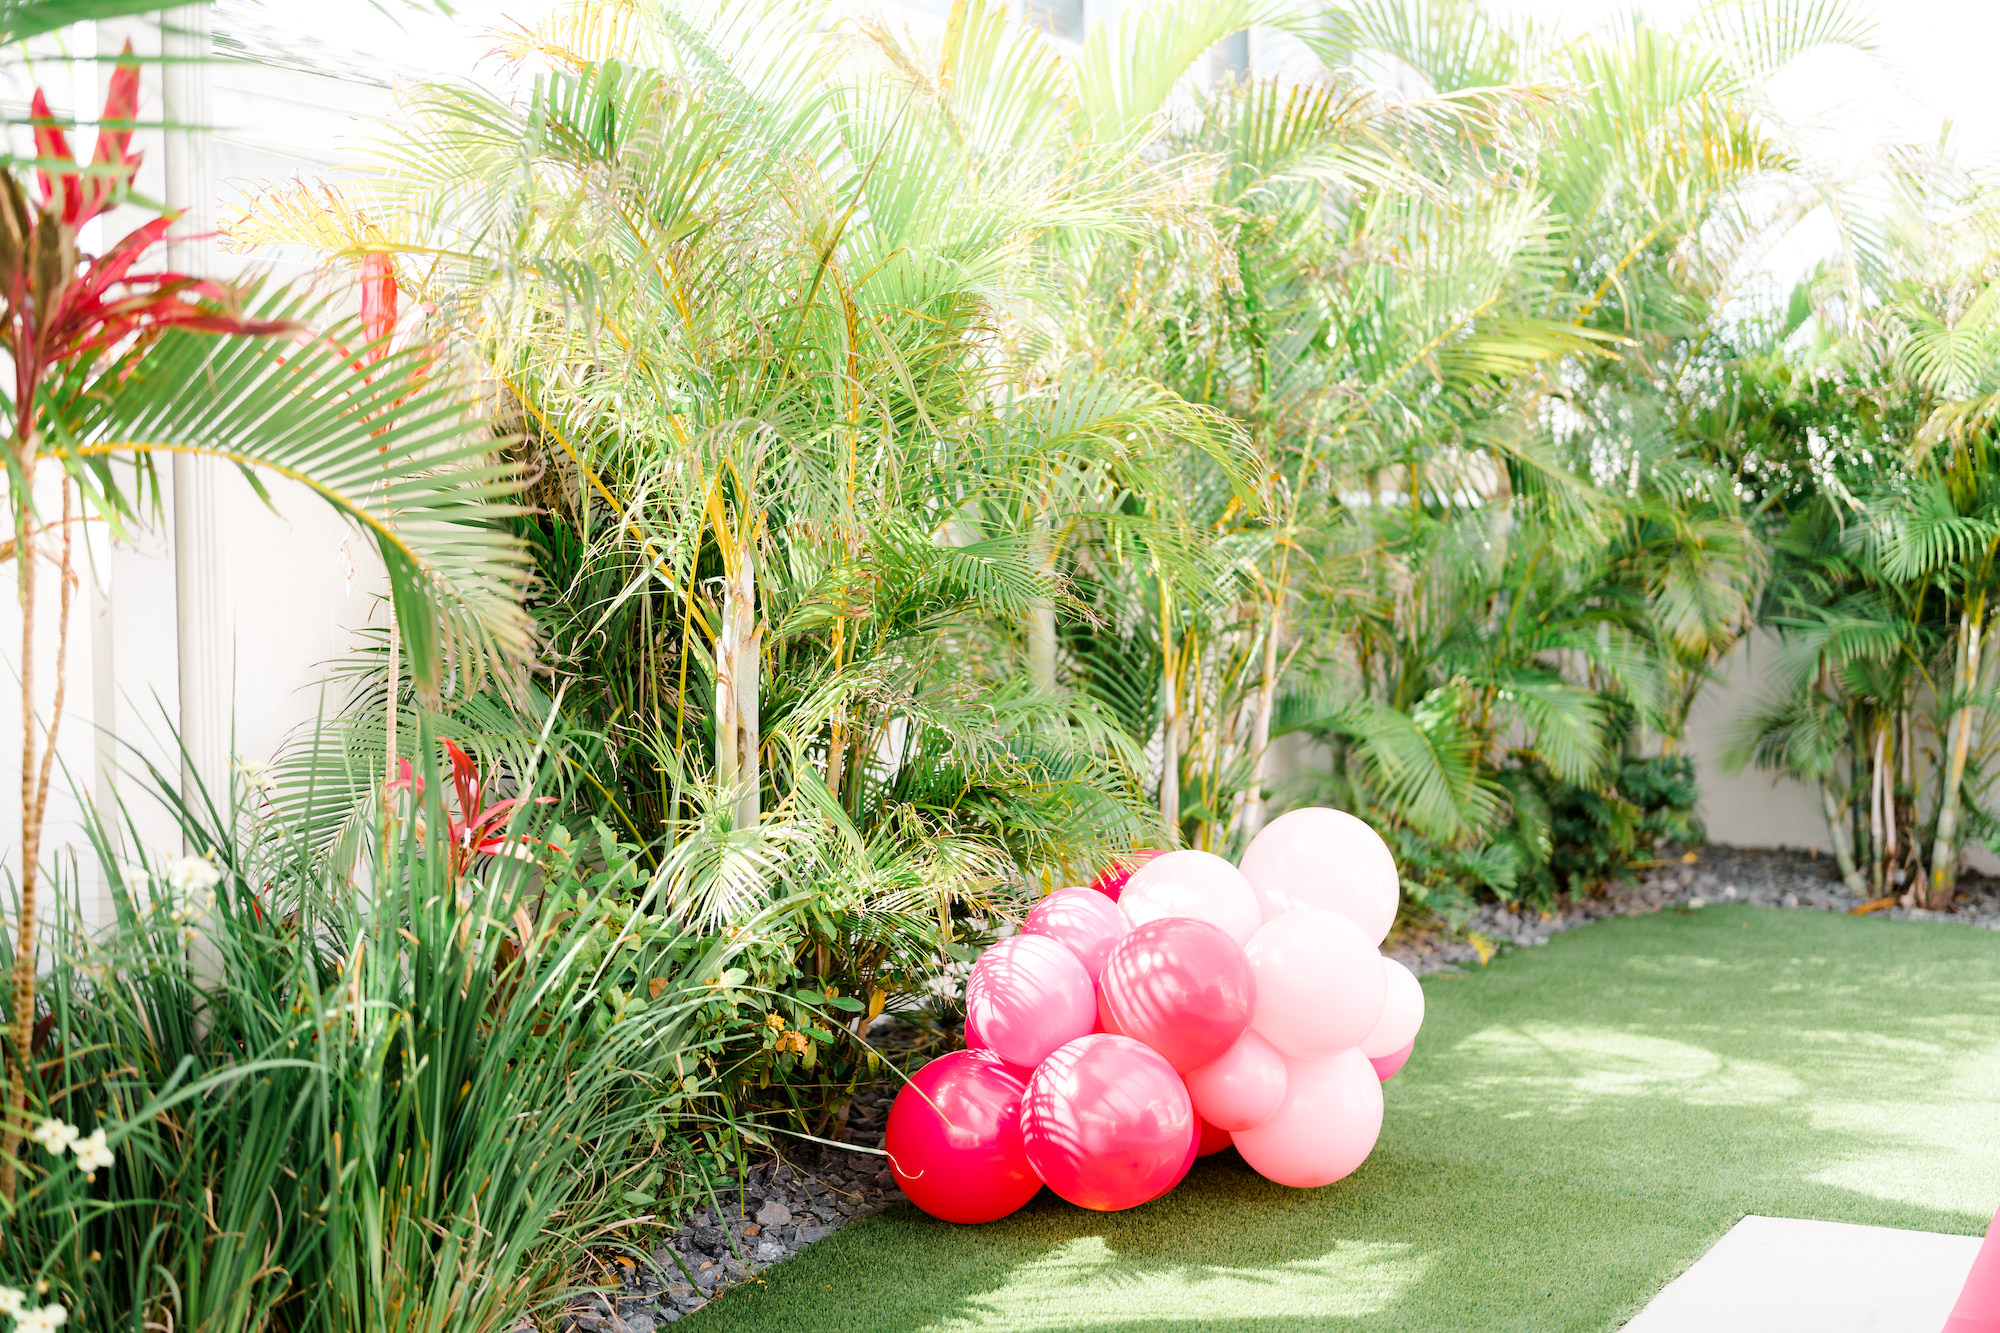 Whimsical Outdoor Wedding Cocktail Hour Decor with Pink Balloons